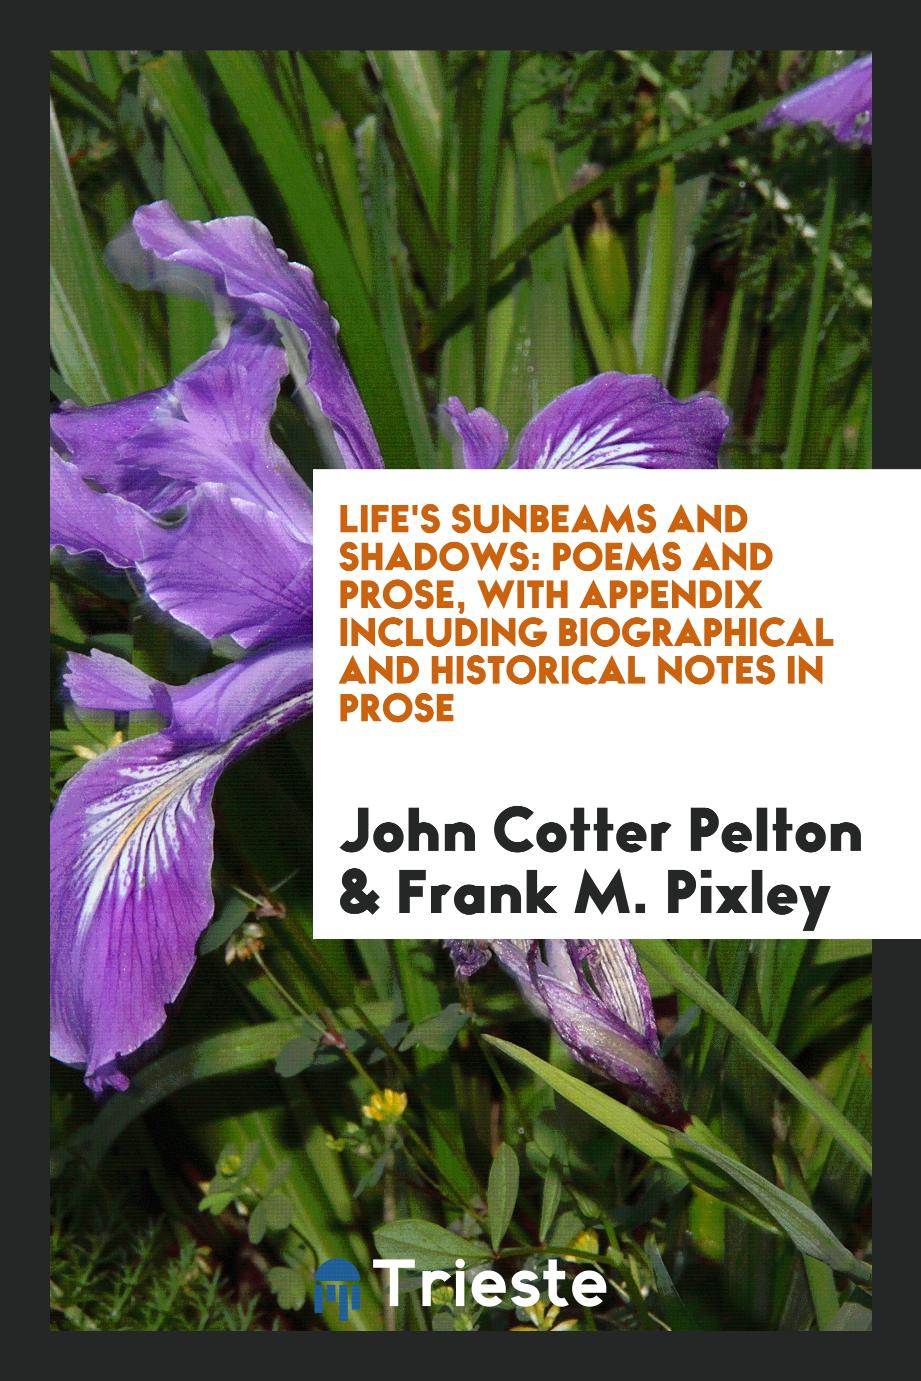 Life's sunbeams and shadows: poems and prose, with appendix including biographical and historical notes in prose